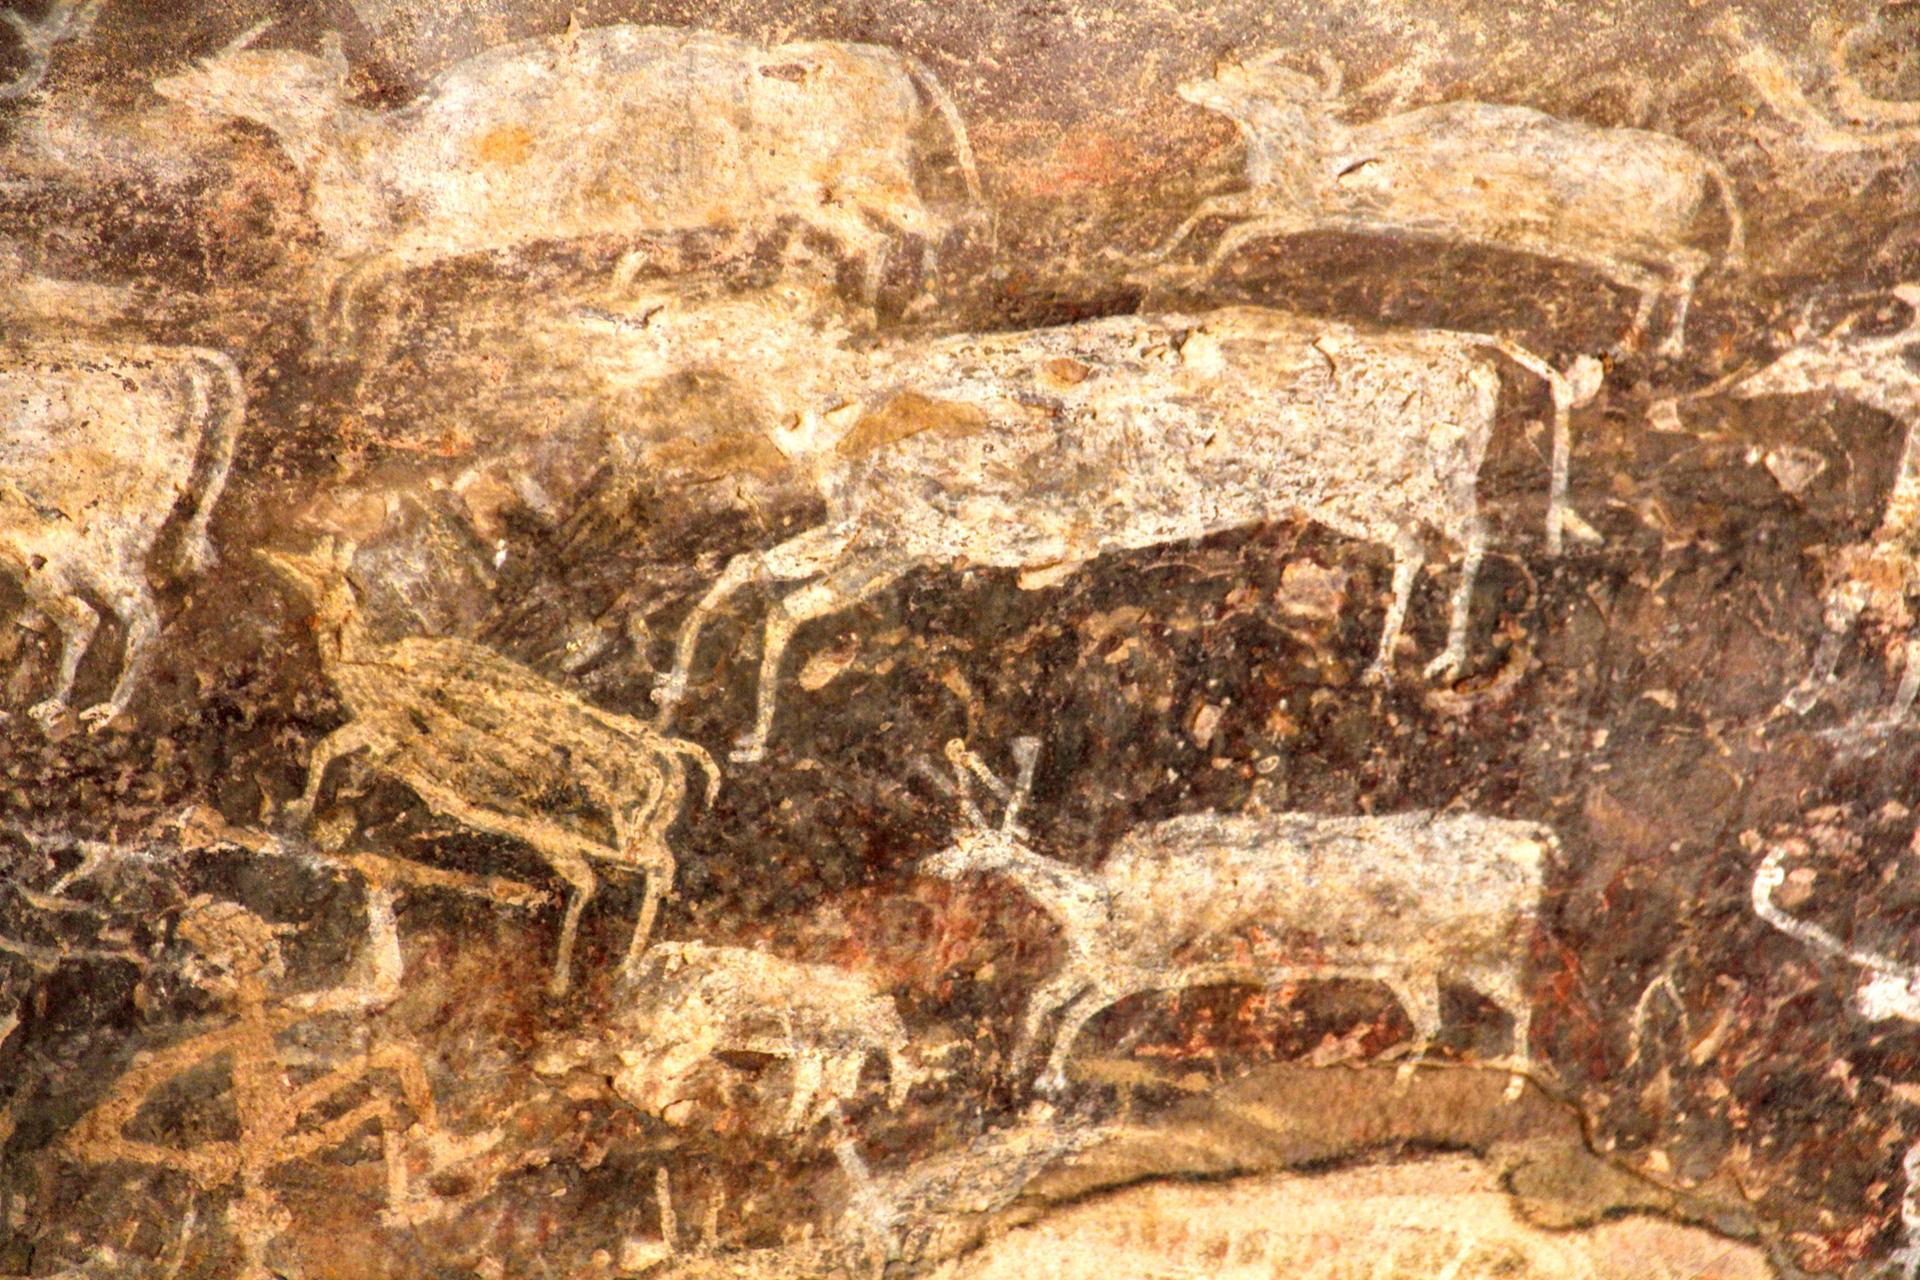 India's rock of ages: exploring the earliest evidence of human life at  Bhimbetka